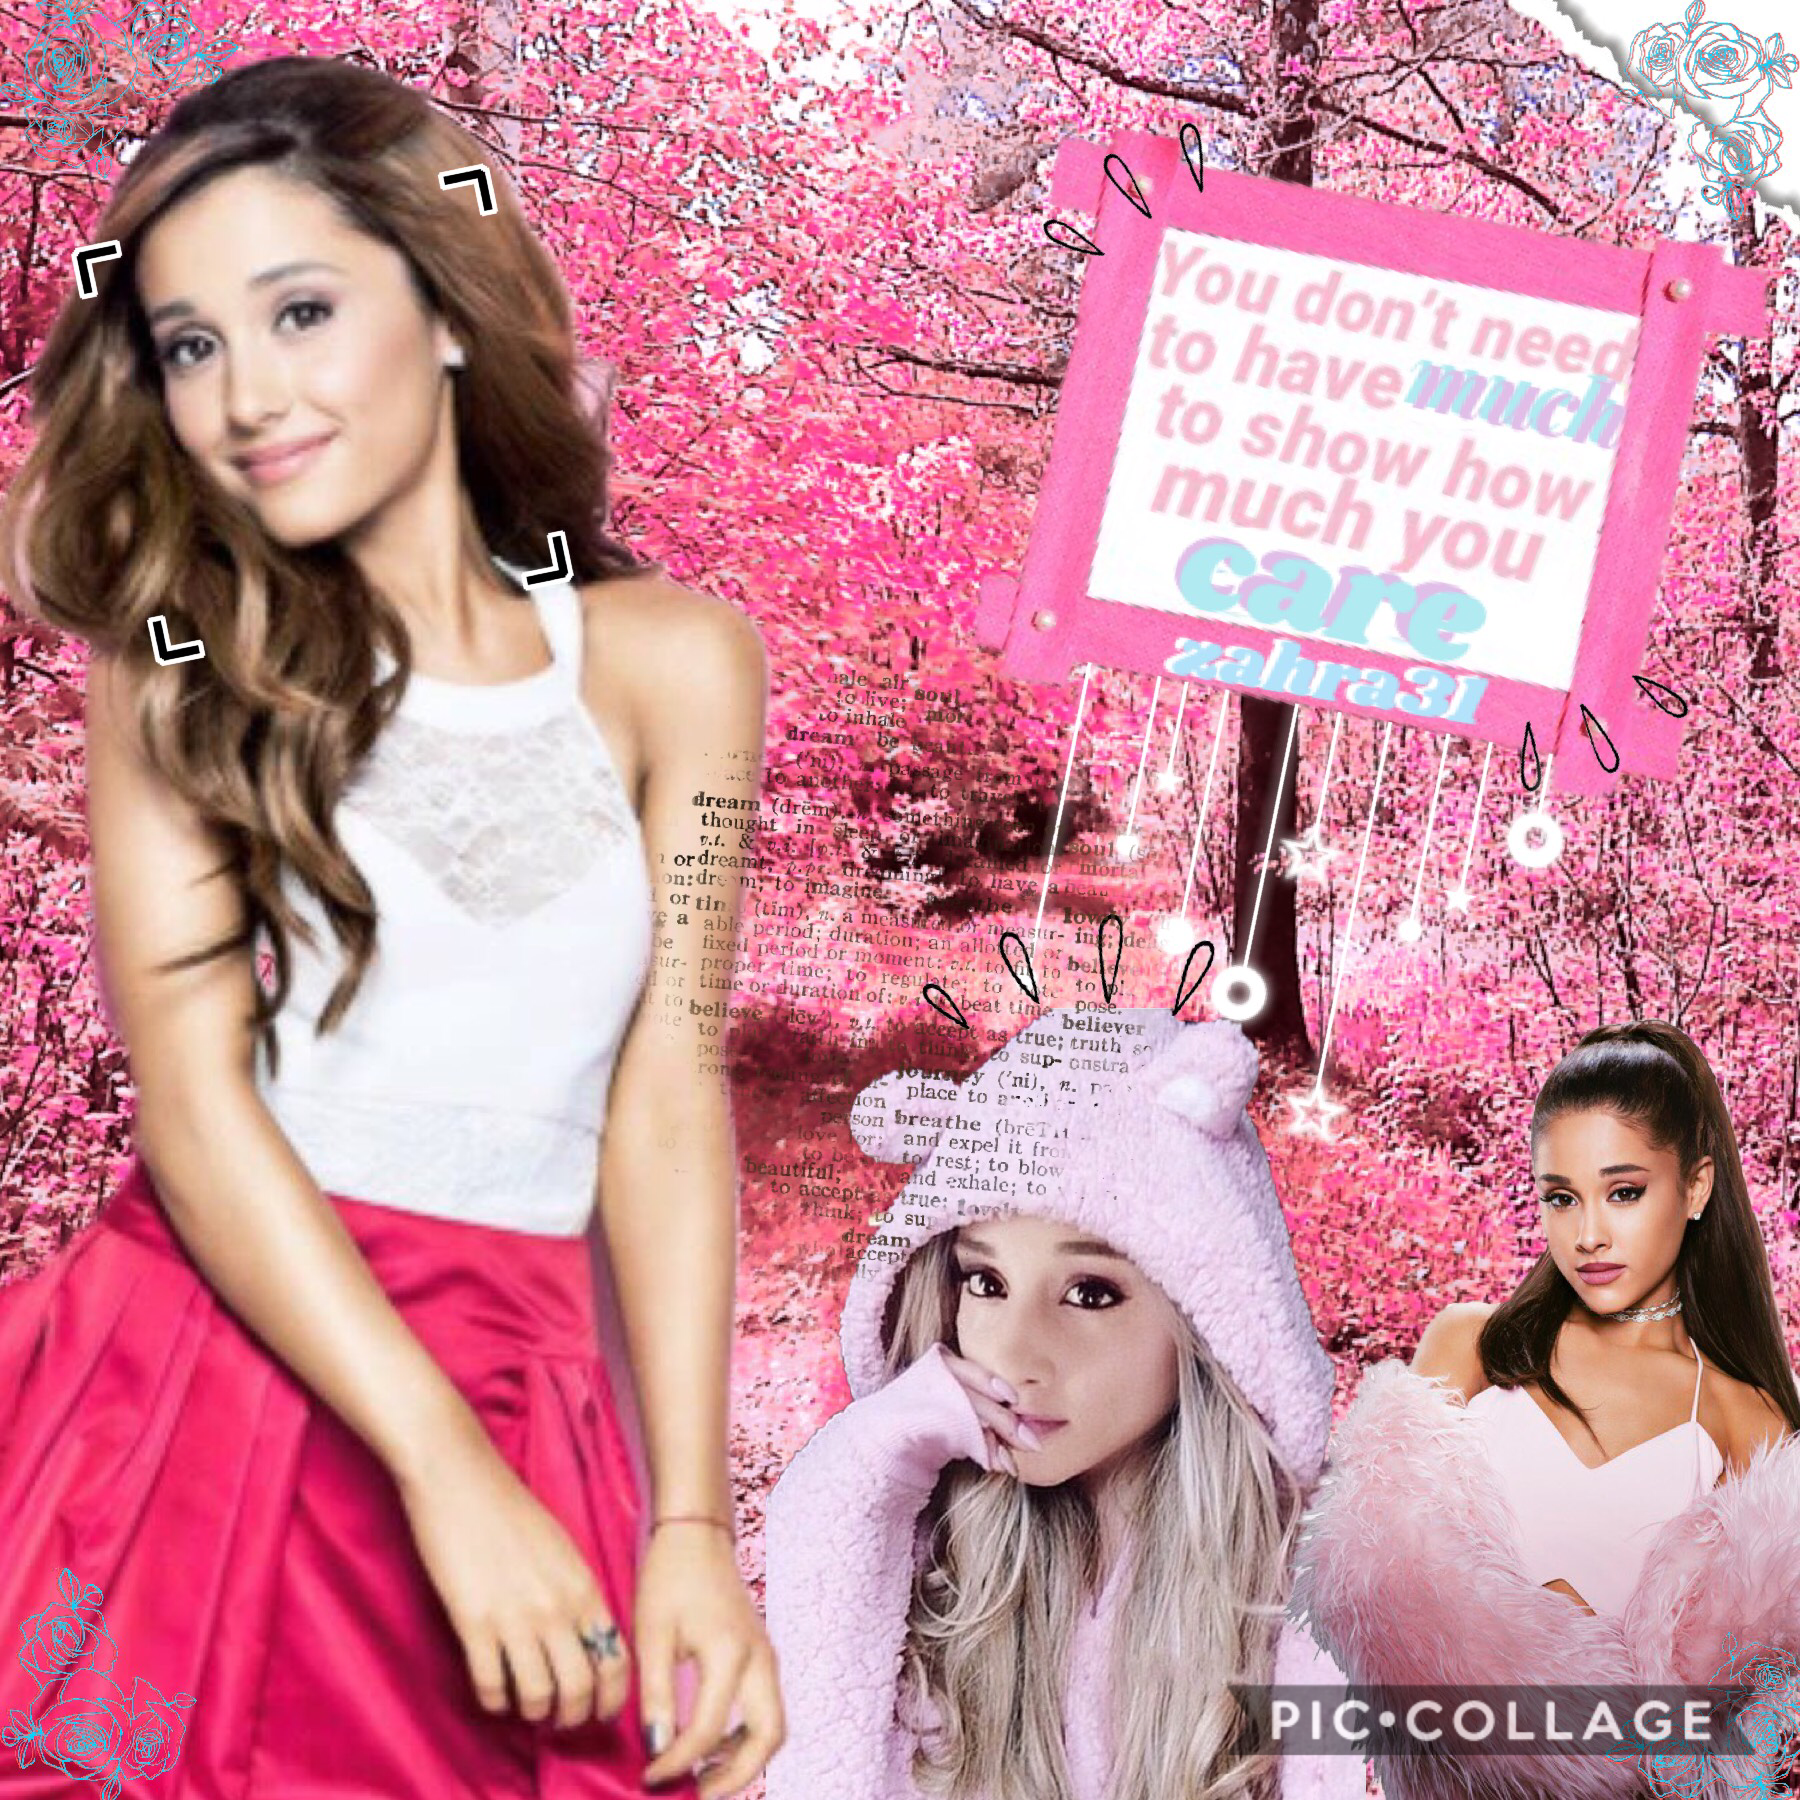 A really cute quote from Ariana grande 💖😊